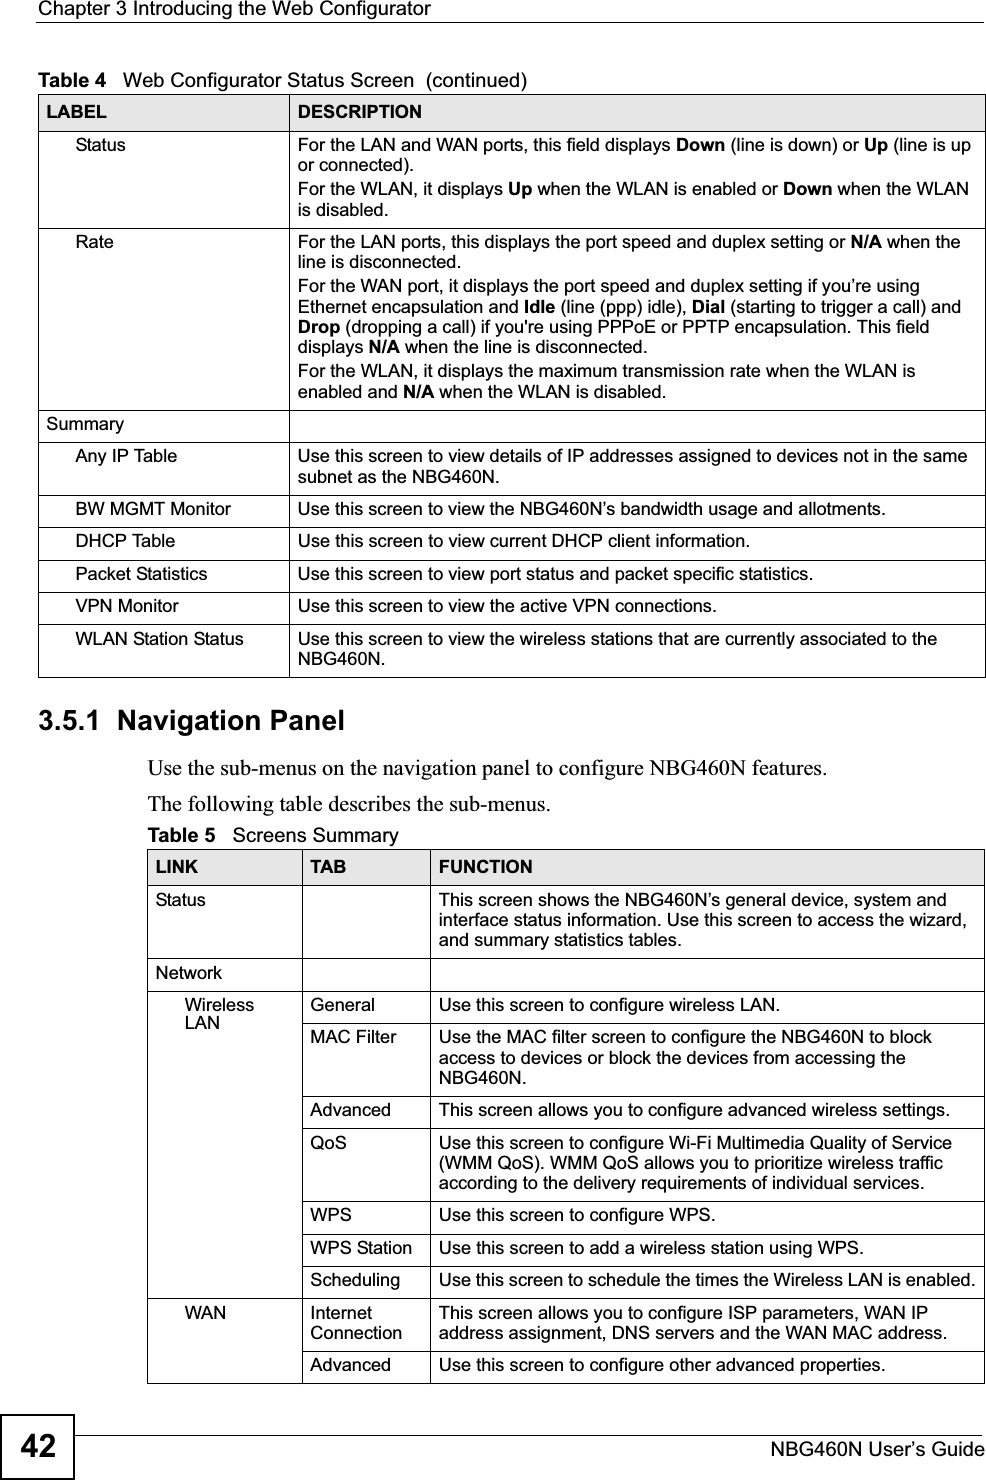 Chapter 3 Introducing the Web ConfiguratorNBG460N User’s Guide423.5.1  Navigation PanelUse the sub-menus on the navigation panel to configure NBG460N features. The following table describes the sub-menus.Status For the LAN and WAN ports, this field displays Down (line is down) or Up (line is up or connected).For the WLAN, it displays Up when the WLAN is enabled or Down when the WLAN is disabled.Rate For the LAN ports, this displays the port speed and duplex setting or N/A when the line is disconnected.For the WAN port, it displays the port speed and duplex setting if you’re using Ethernet encapsulation and Idle (line (ppp) idle), Dial (starting to trigger a call) and Drop (dropping a call) if you&apos;re using PPPoE or PPTP encapsulation. This field displays N/A when the line is disconnected.For the WLAN, it displays the maximum transmission rate when the WLAN is enabled and N/A when the WLAN is disabled.SummaryAny IP Table Use this screen to view details of IP addresses assigned to devices not in the same subnet as the NBG460N.BW MGMT Monitor Use this screen to view the NBG460N’s bandwidth usage and allotments.DHCP Table Use this screen to view current DHCP client information.Packet Statistics Use this screen to view port status and packet specific statistics.VPN Monitor Use this screen to view the active VPN connections.WLAN Station Status Use this screen to view the wireless stations that are currently associated to the NBG460N.Table 4   Web Configurator Status Screen  (continued) LABEL DESCRIPTIONTable 5   Screens SummaryLINK TAB FUNCTIONStatus This screen shows the NBG460N’s general device, system and interface status information. Use this screen to access the wizard, and summary statistics tables.NetworkWirelessLANGeneral Use this screen to configure wireless LAN.MAC Filter Use the MAC filter screen to configure the NBG460N to block access to devices or block the devices from accessing the NBG460N.Advanced This screen allows you to configure advanced wireless settings.QoS Use this screen to configure Wi-Fi Multimedia Quality of Service (WMM QoS). WMM QoS allows you to prioritize wireless traffic according to the delivery requirements of individual services.WPS Use this screen to configure WPS.WPS Station Use this screen to add a wireless station using WPS.Scheduling Use this screen to schedule the times the Wireless LAN is enabled.WAN Internet ConnectionThis screen allows you to configure ISP parameters, WAN IP address assignment, DNS servers and the WAN MAC address. Advanced Use this screen to configure other advanced properties.